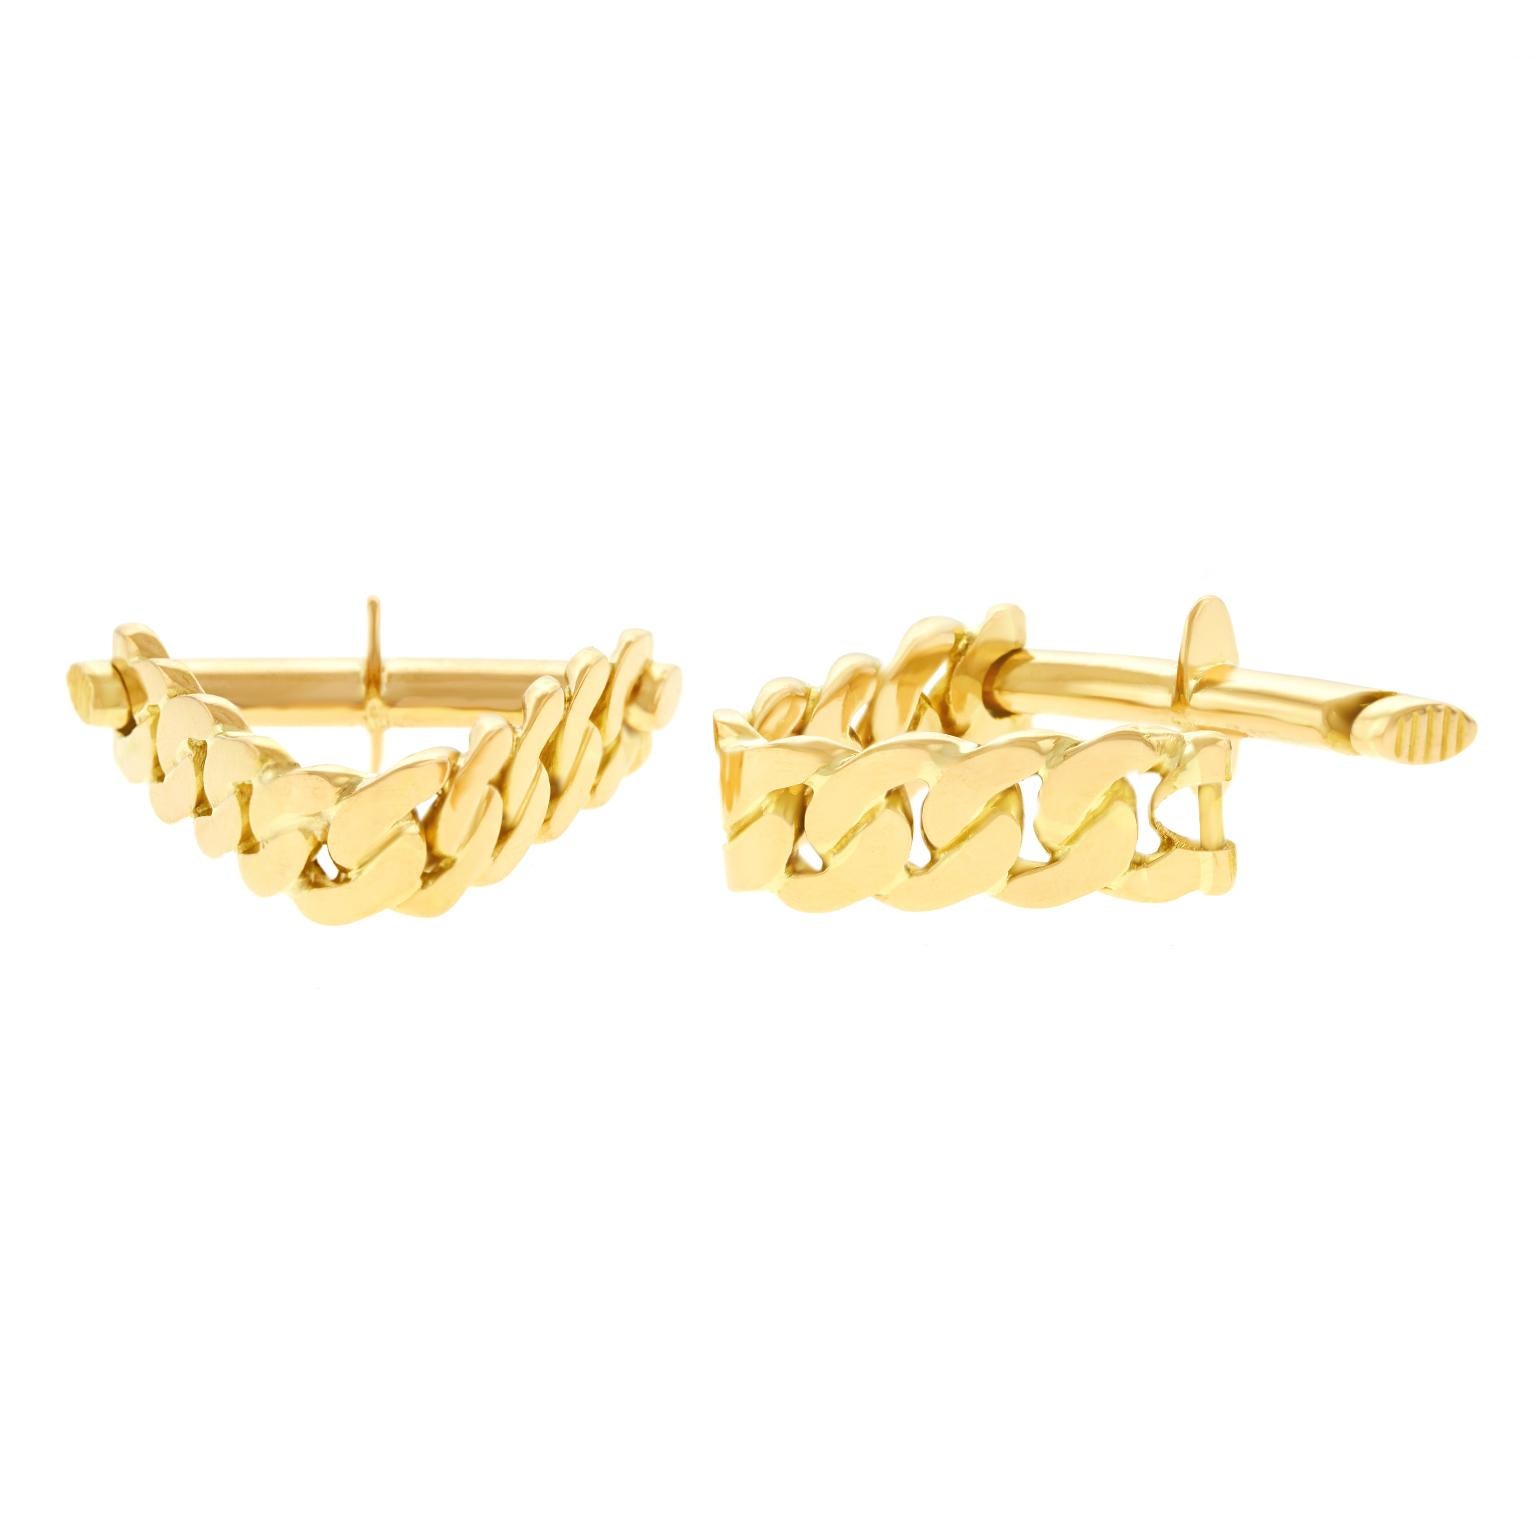 Circa 1959, 18k, Finland. Unique in form, these chain motif cufflinks have an understated verve, perfect for the less is more fashion moment. Dated from 1959, this pair is in excellent condition. 
 
Remark: 